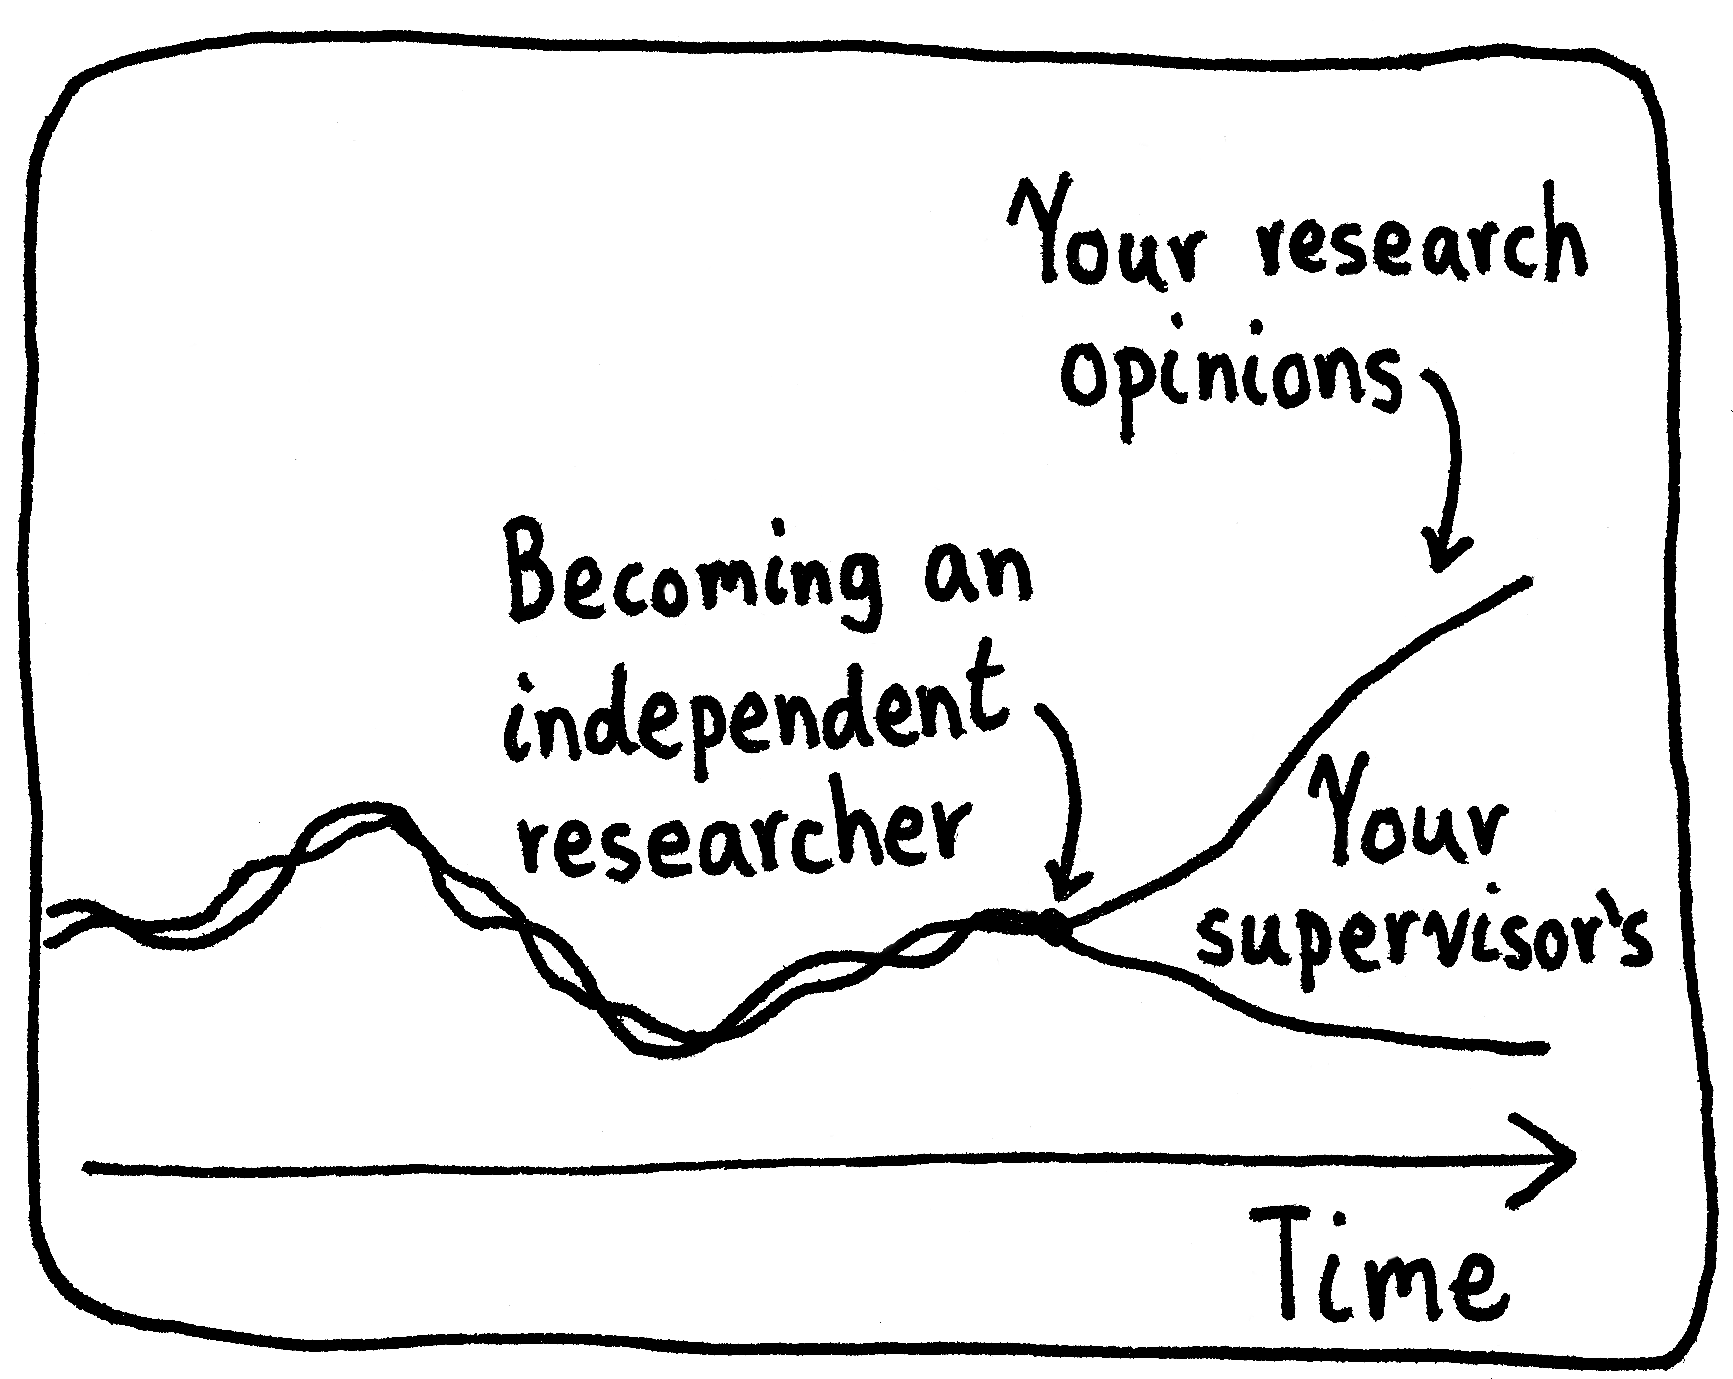 Two curves representing your research opinions and those of your supervisor's over time. On the left, they move in lockstep. But after some amount of time, there comes a decoupling point where they diverge, representing when you become an independent researcher.